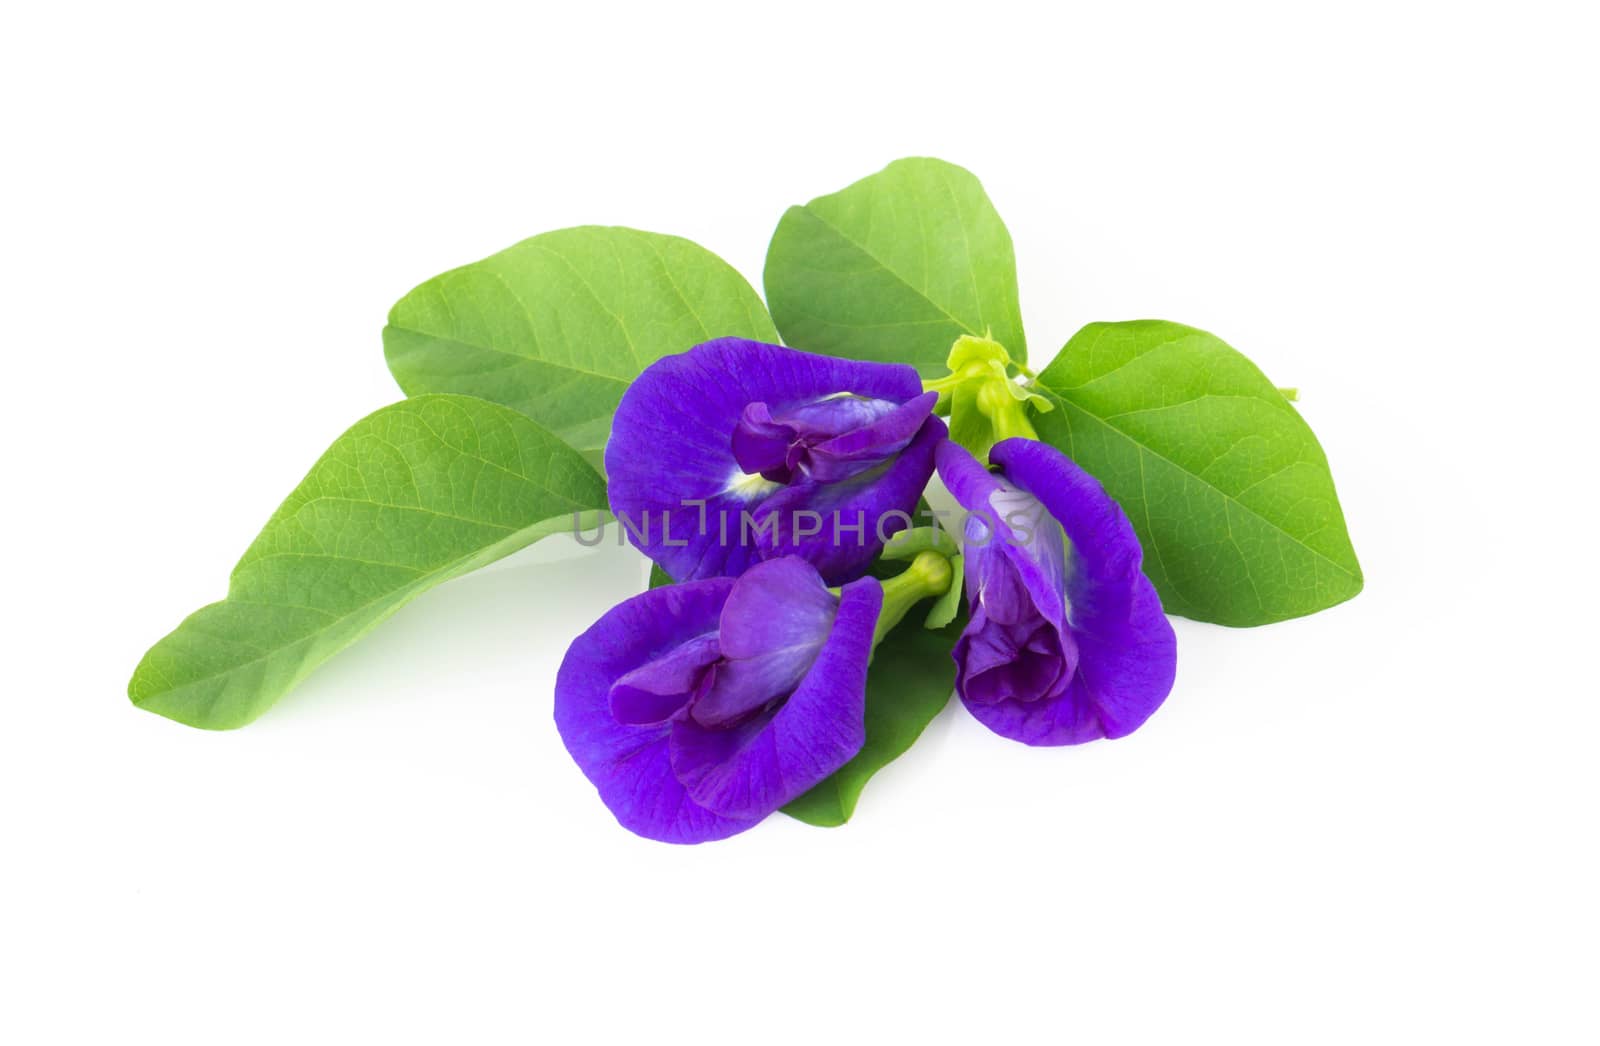 Butterfly pea flower on white background, herb and medical conce by pt.pongsak@gmail.com